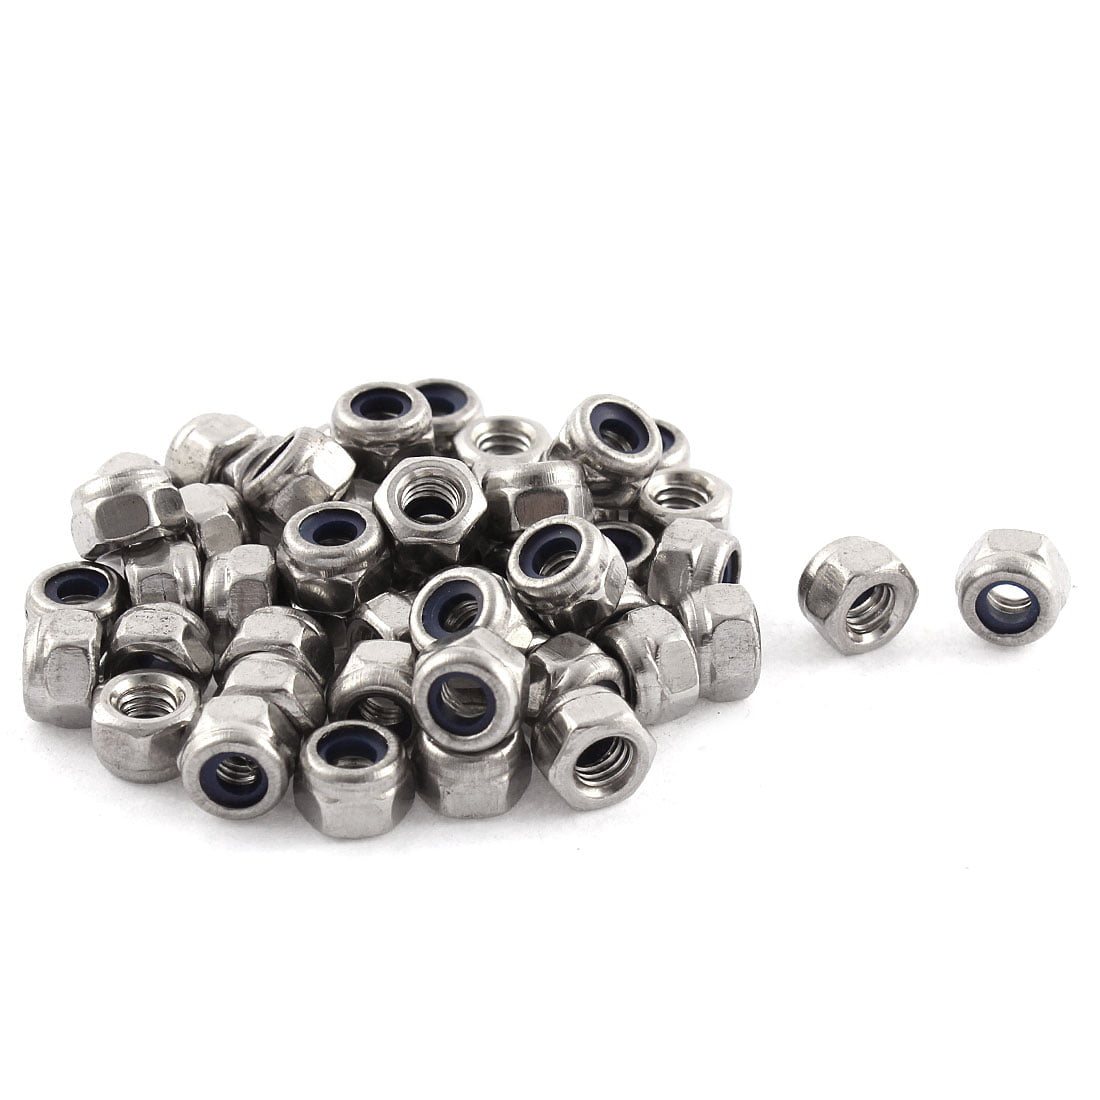 Carbon Steel White Zinc Plated Pack of 50 uxcell M4 x 0.7mm Nylon Insert Hex Lock Nuts 